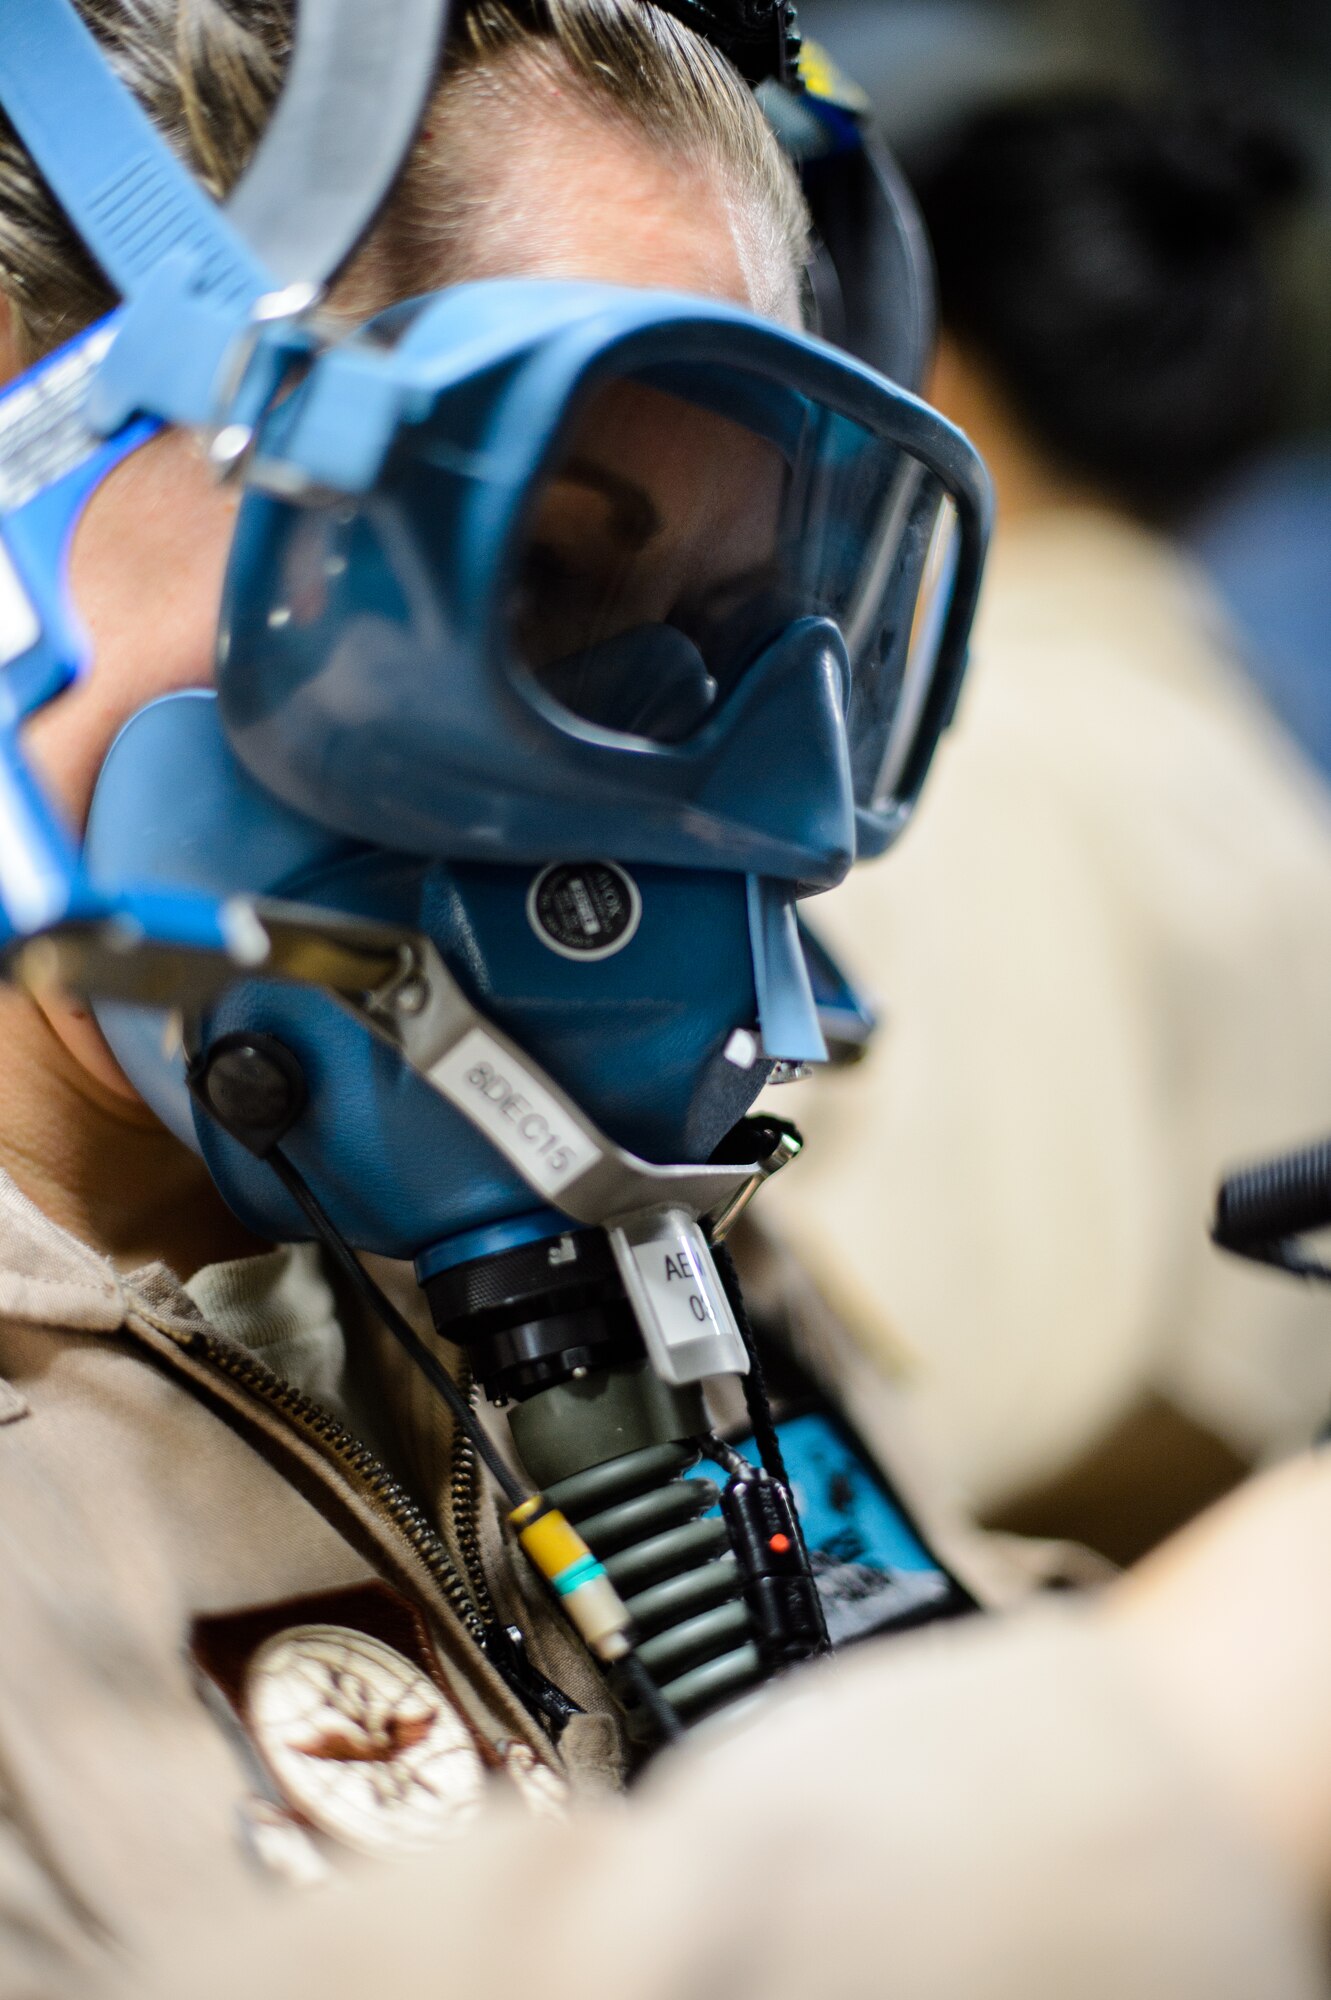 Senior Airman Beverly Spencer, 10th Expeditionary Aeromedical Evacuation Flight technician, tests her oxygen mask for leaks prior to a flight Nov. 10, 2015, at Ramstein Air Base, Germany. After configuring the inside of the C-17 Globemaster III into a flying ambulance, the Airmen test their equipment to ensure they can provide the best possible treatment while flying thousands of feet in the air. The 10th EAEF is a mixture of active-duty, reserve and guard Airmen deployed to Ramstein, constantly flying to war zones to retrieve patients needing higher levels of medical care. (U.S. Air Force photo/Staff Sgt. Armando A. Schwier-Morales)